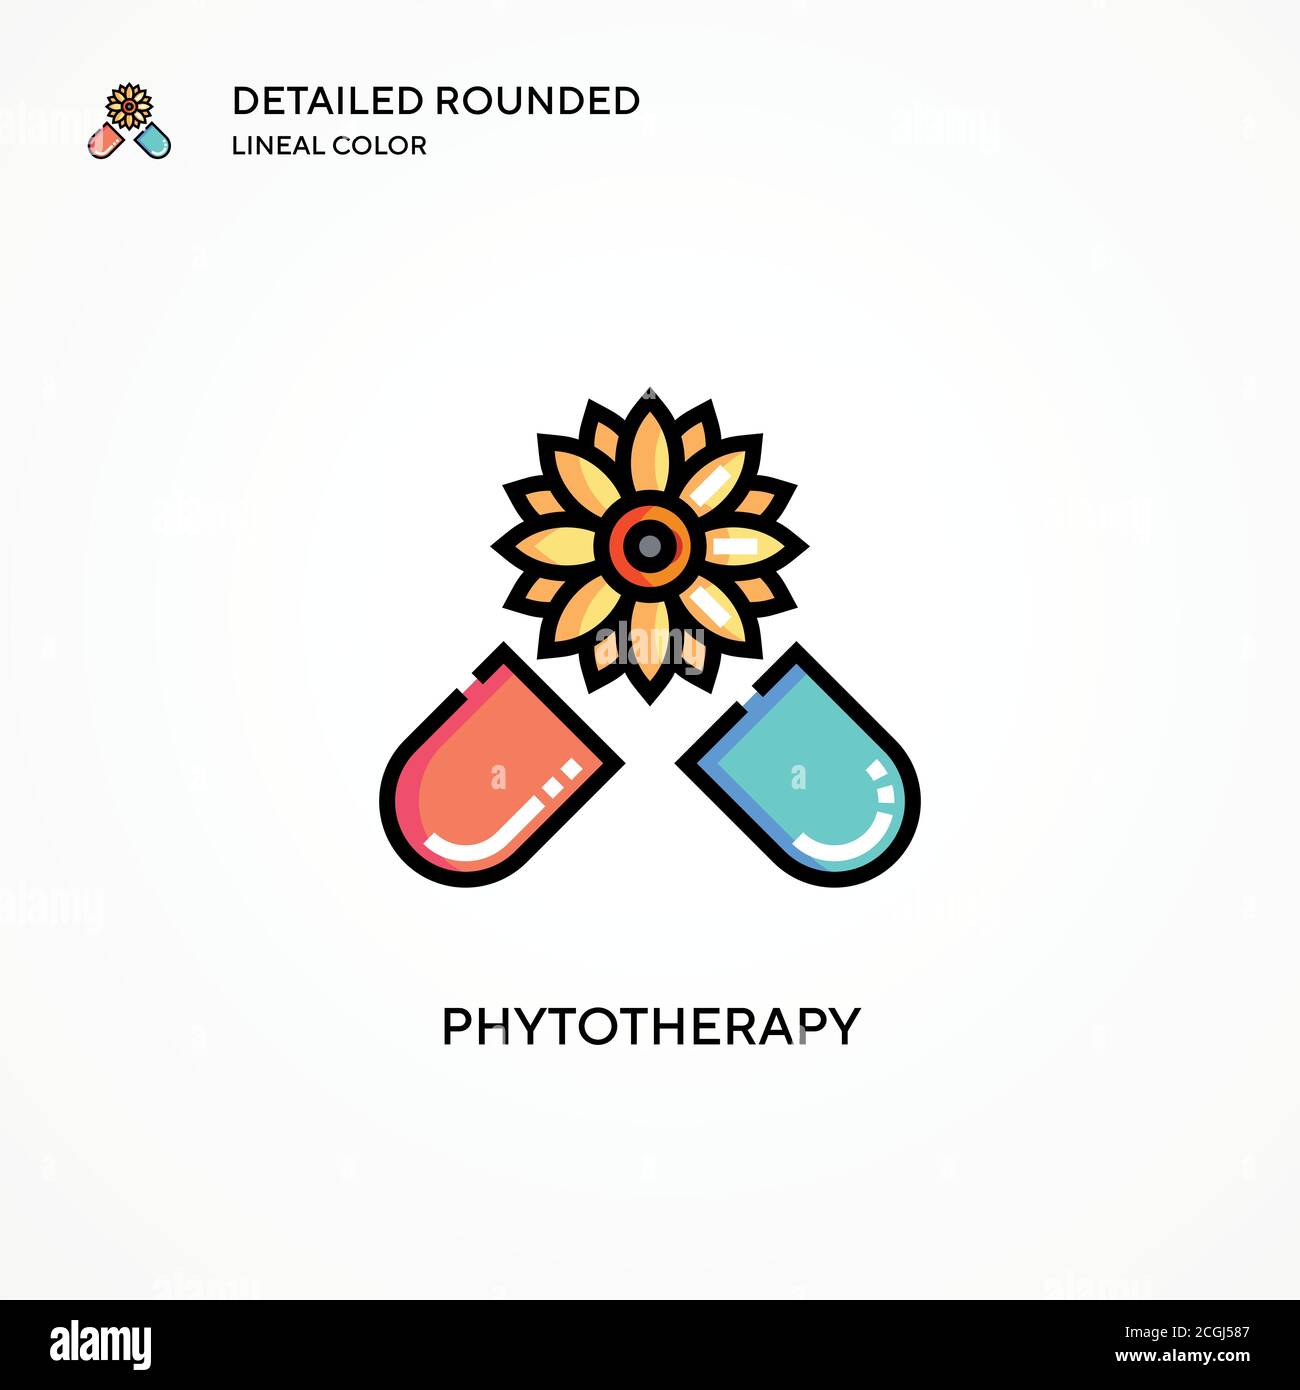 Phytotherapy vector icon. Modern vector illustration concepts. Easy to edit and customize. Stock Vector